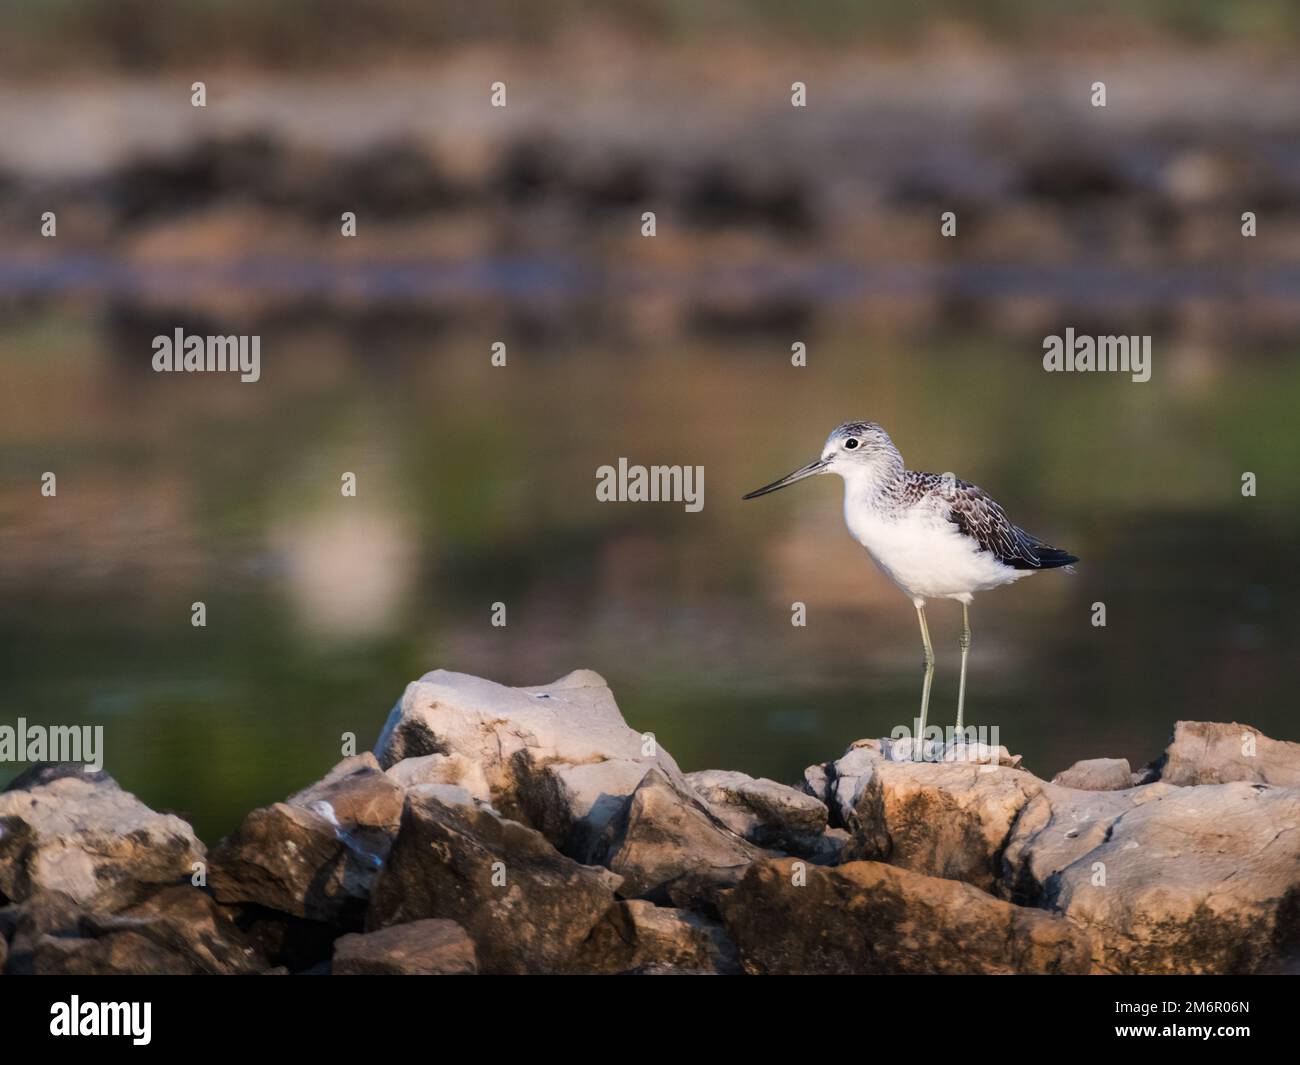 Green Sandpiper (Tringa ochropus) is a small Wader Shorebird of the Old World. Bird Wading in Shallow Water of Wetland during Mi Stock Photo